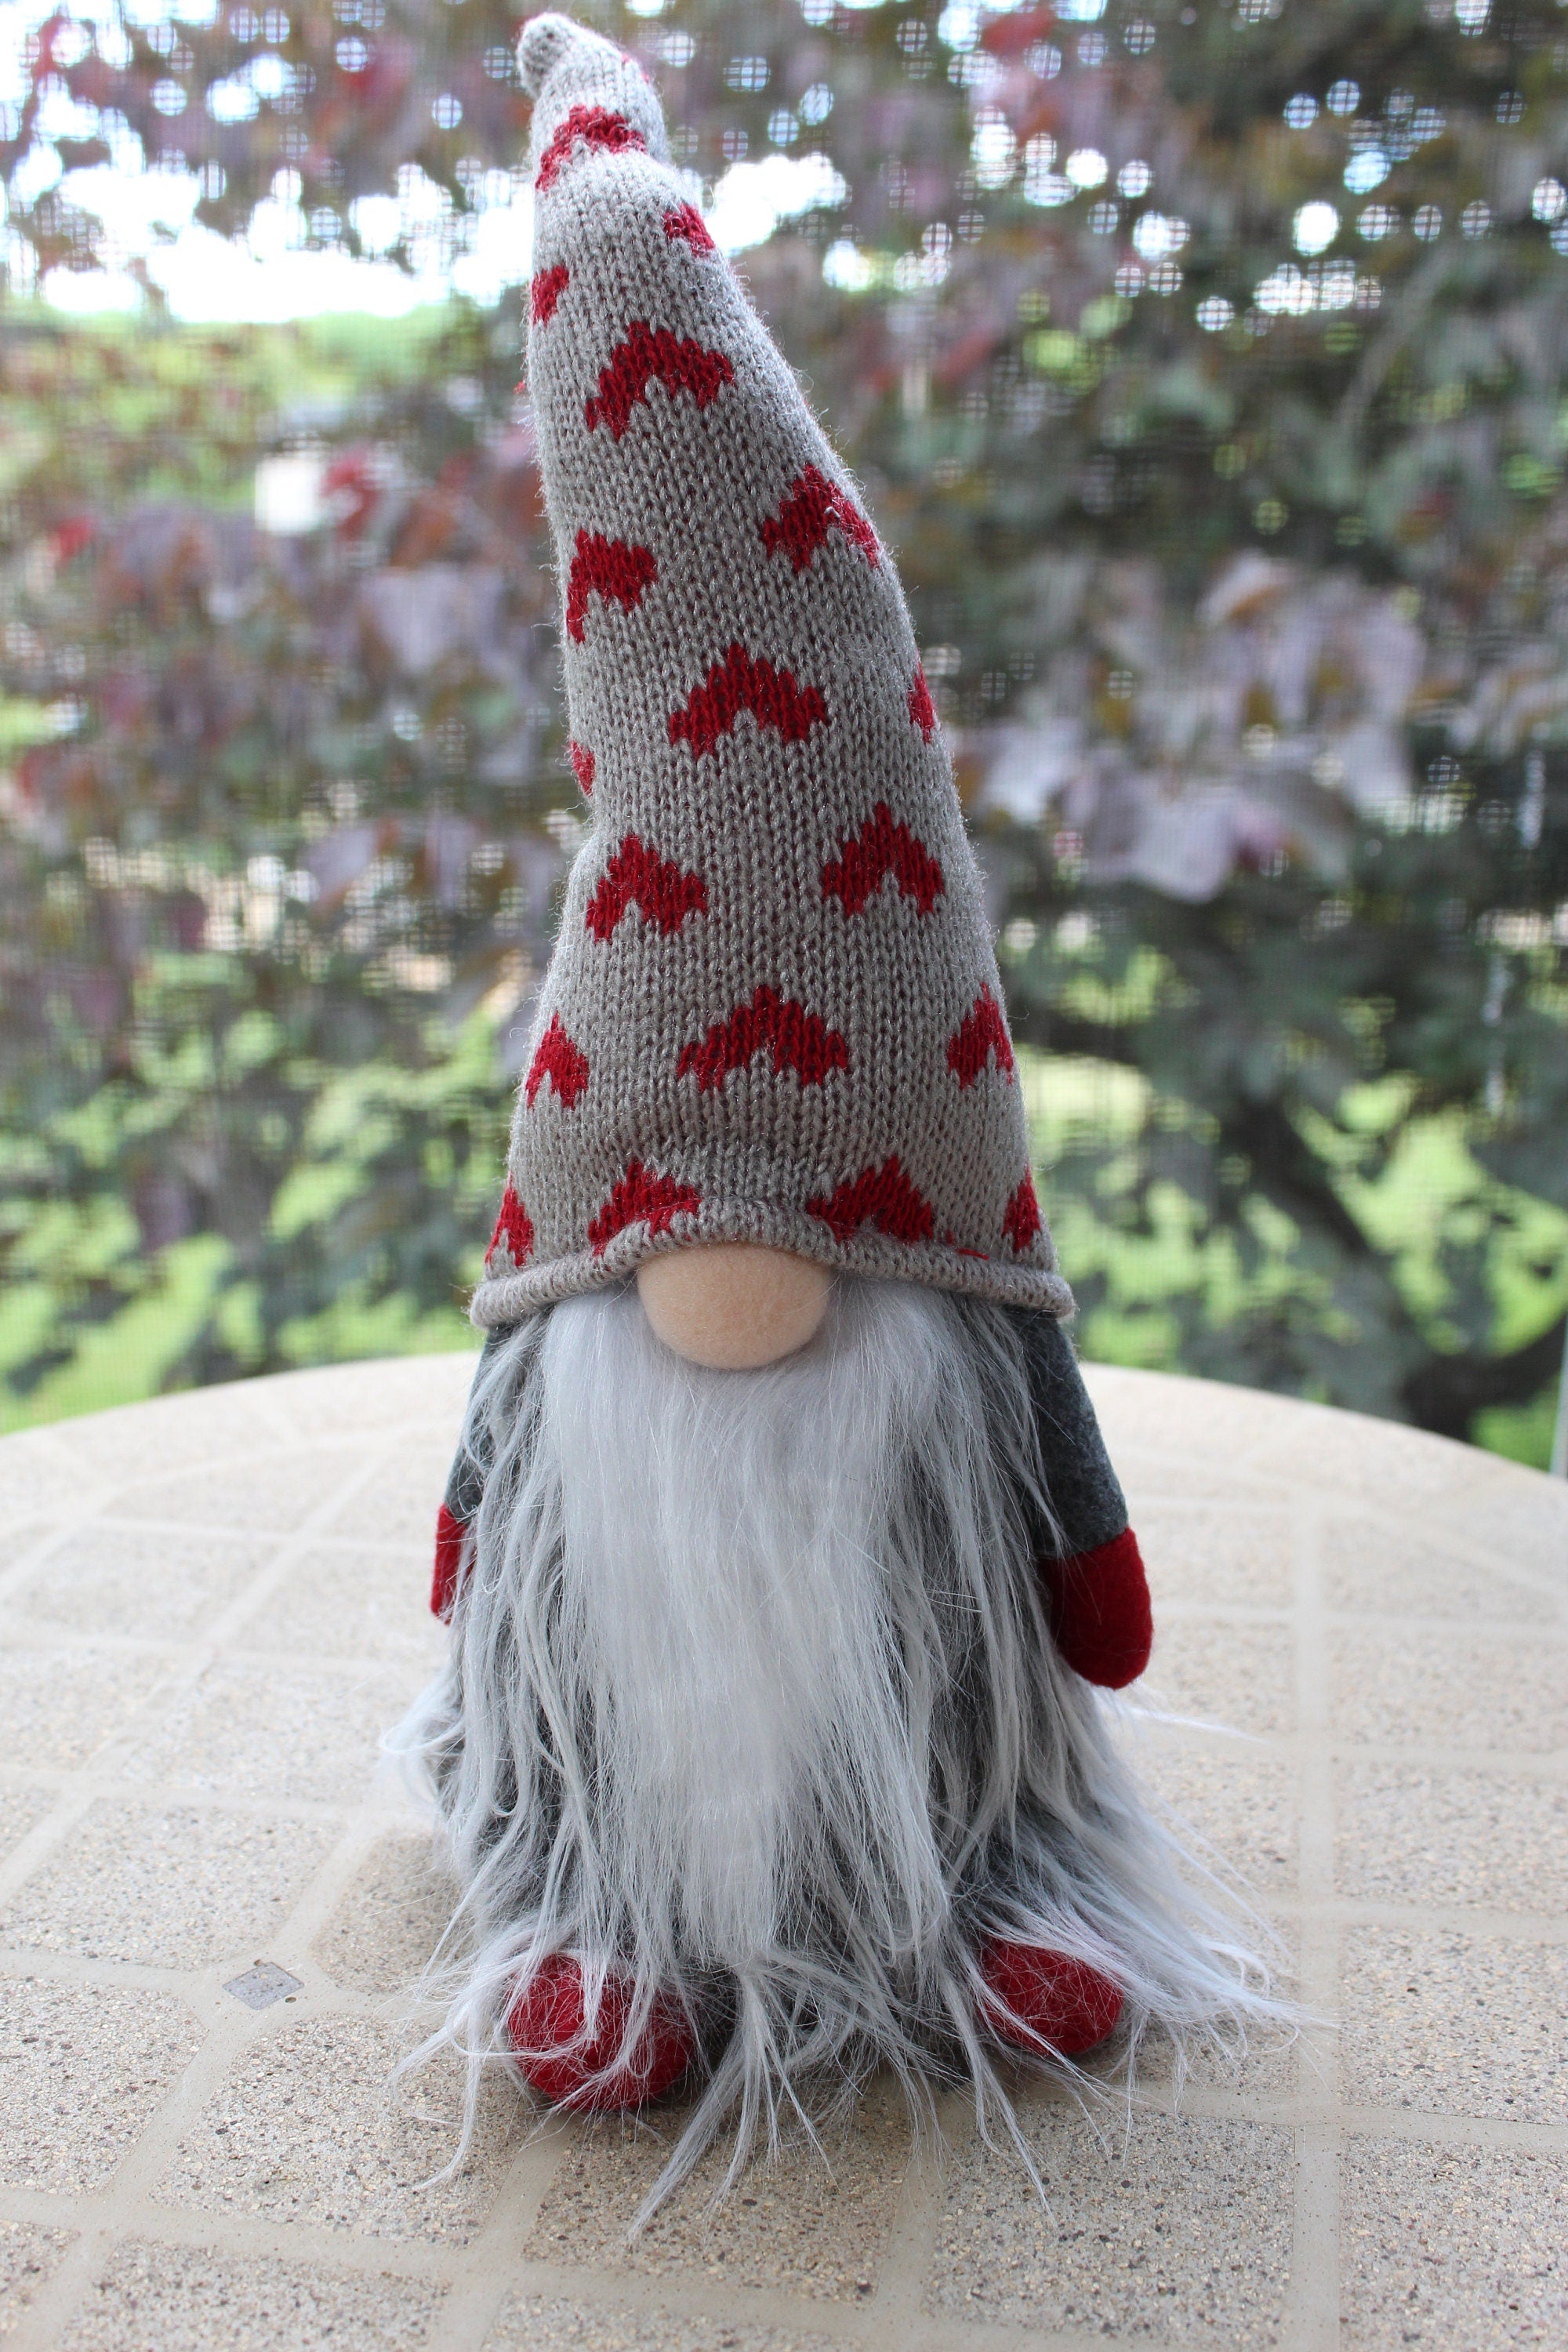 1 Pack Christmas Gnomes Plush, Handmade Swedish Santa Gnome Scandinavian  Tomte Nisse Nordic Gnomes Gifts Christmas Decorations for Holiday Party,  Home Ornaments 